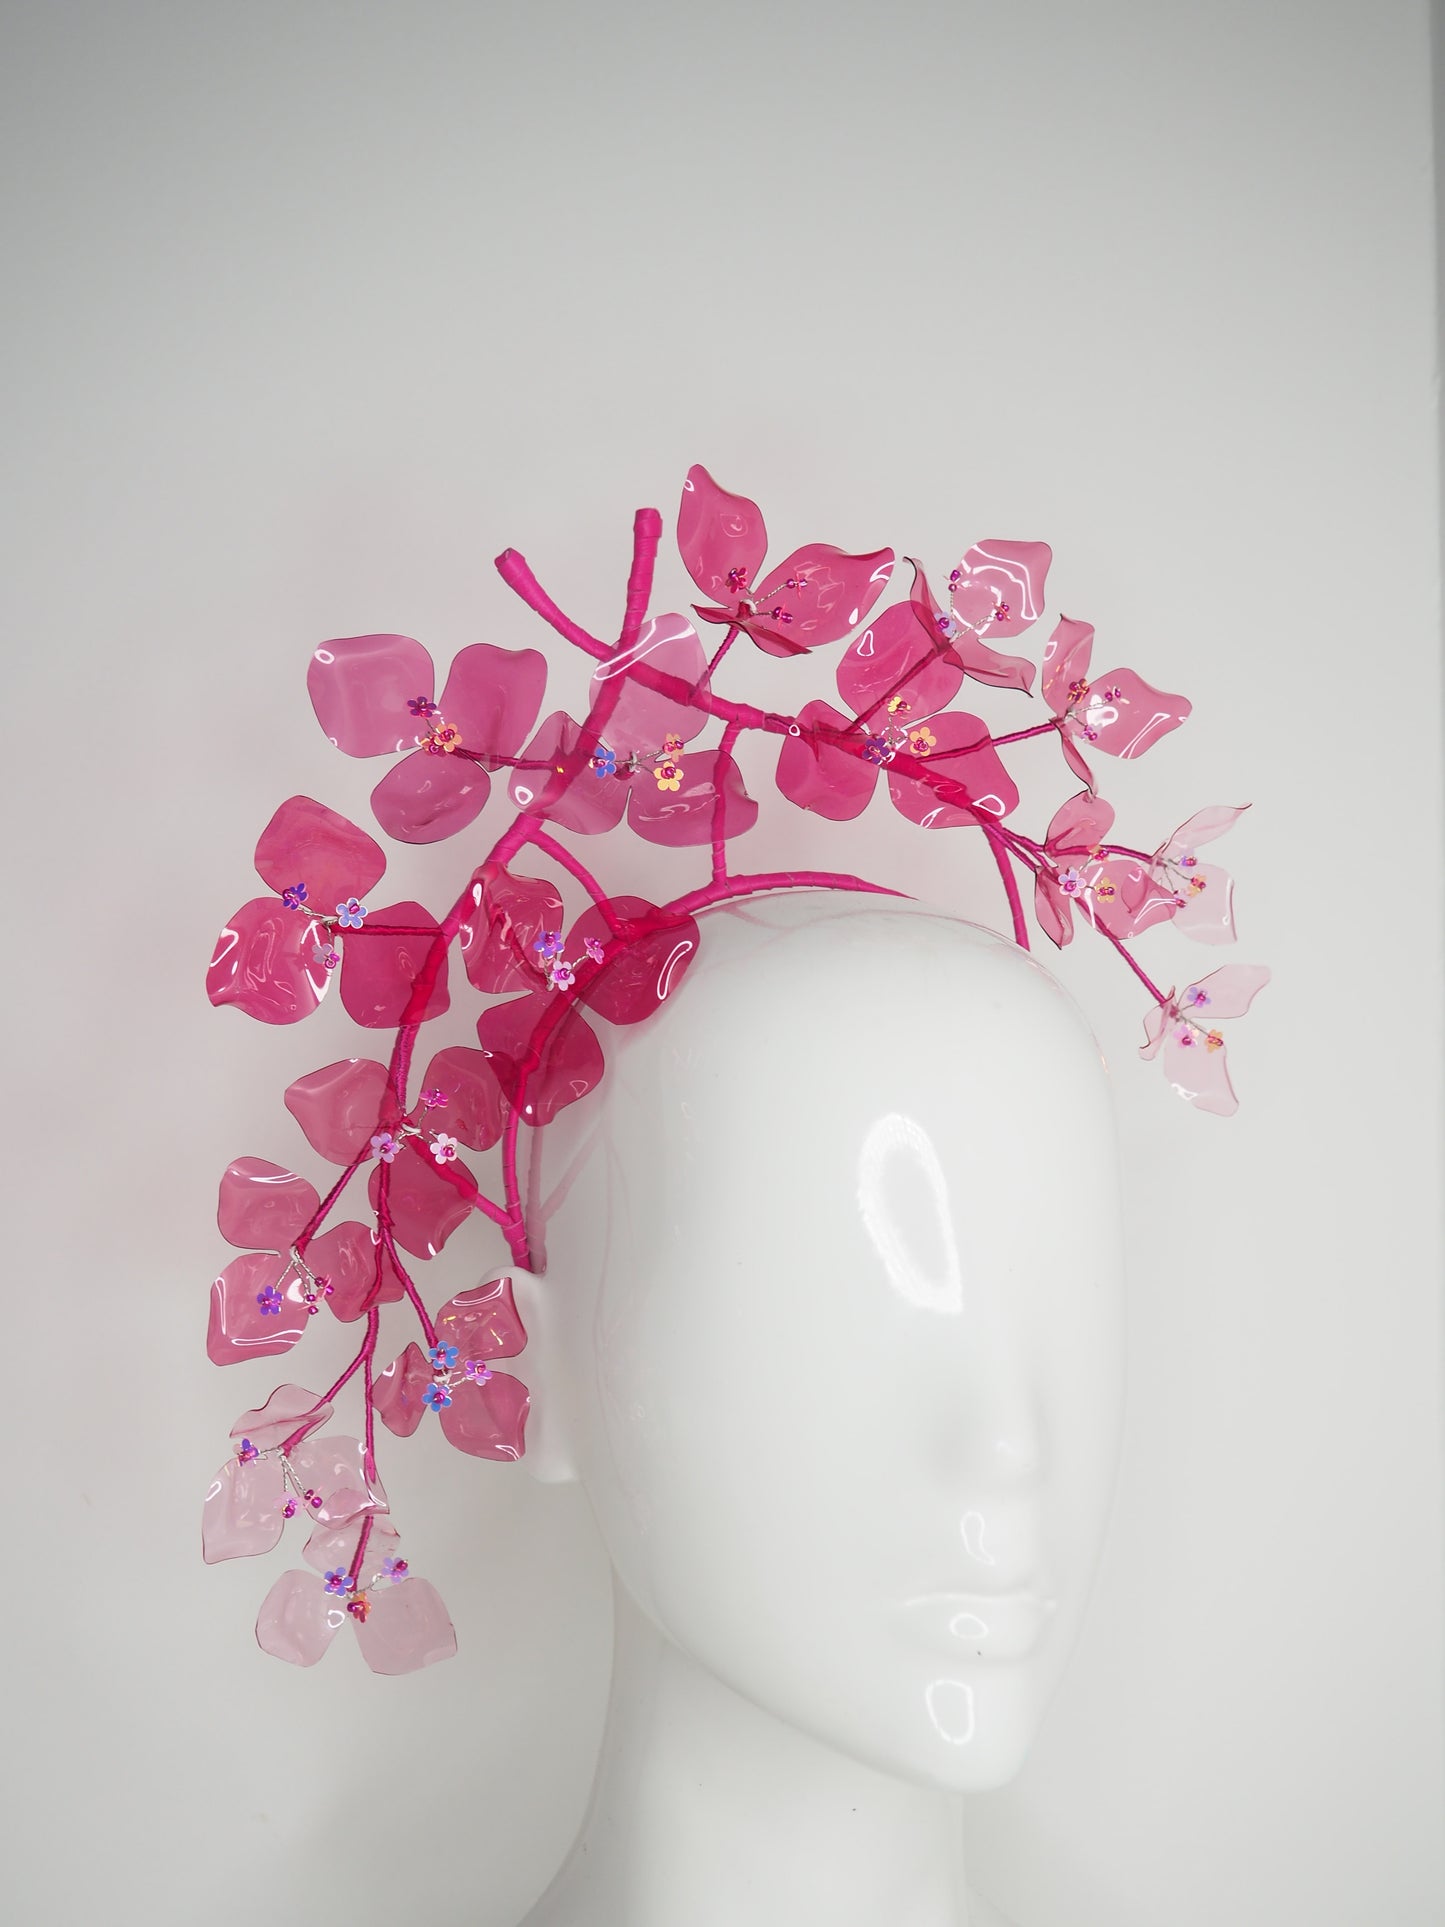 Bouganvillea Bliss - Ombre crystoform bouganvillea vine is shades of pink with leather vine